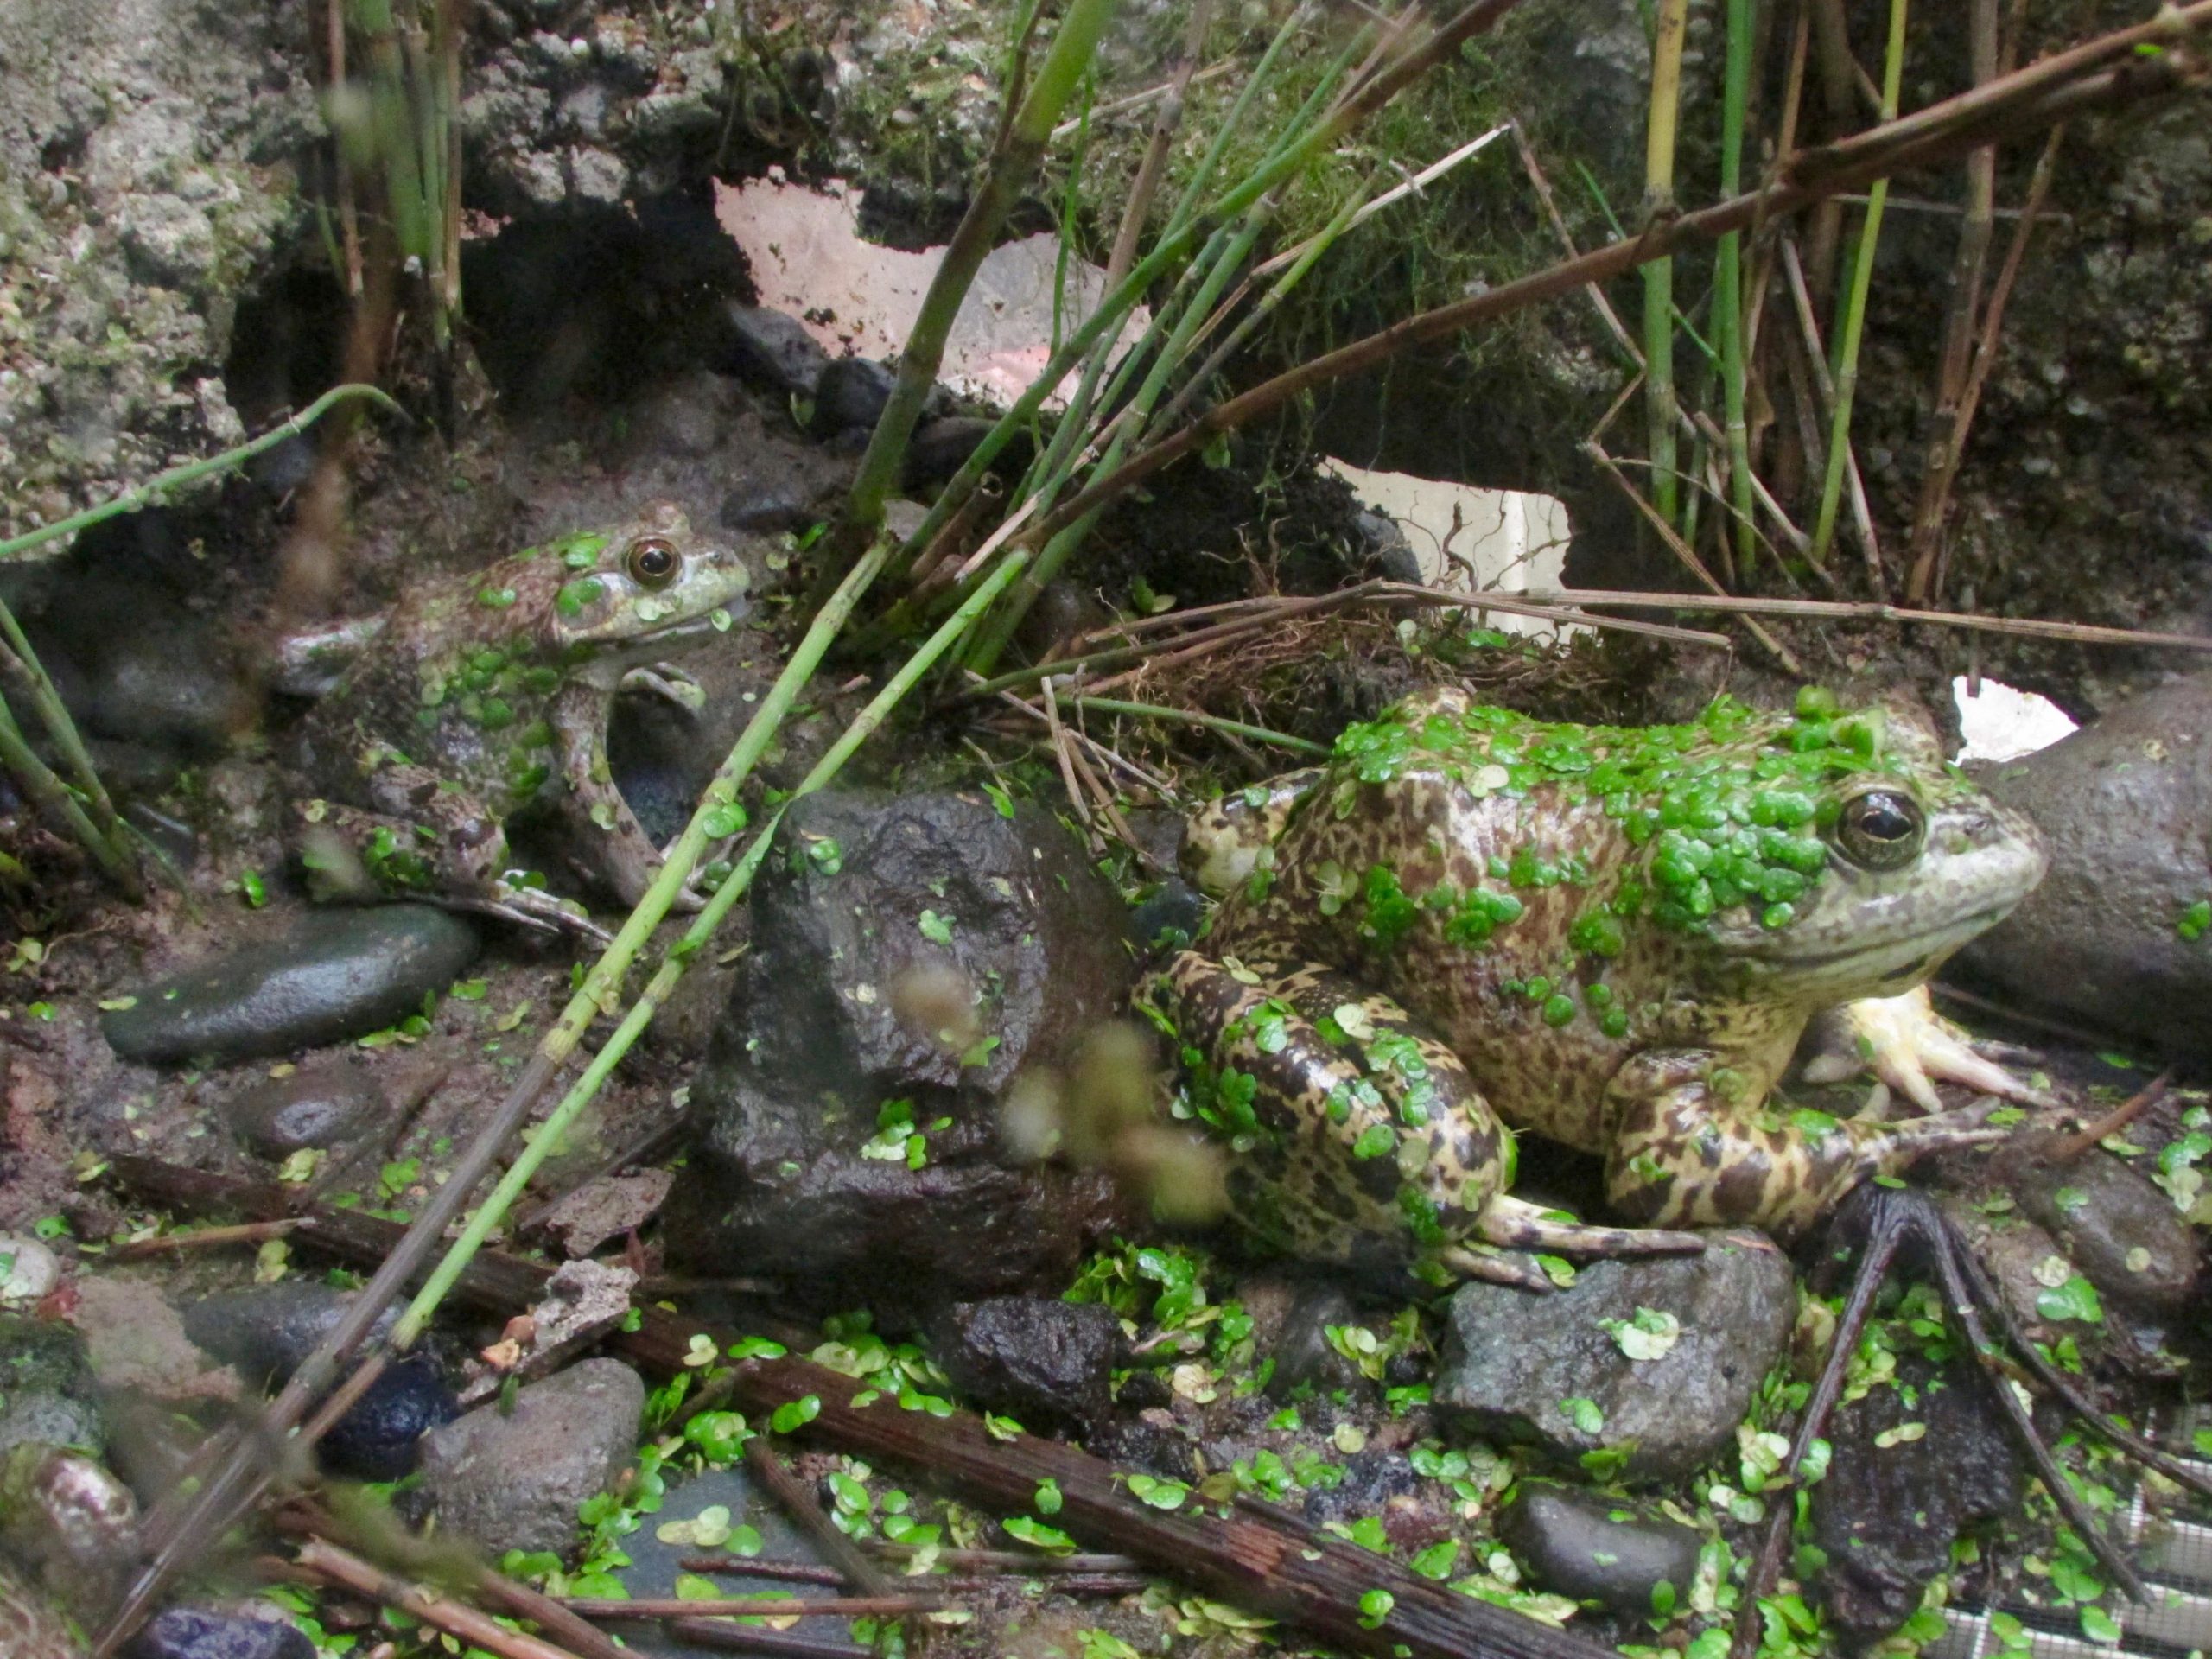 Amphibian Populations in Ecuador Threatened by Invasive Species, Lethal Fungus